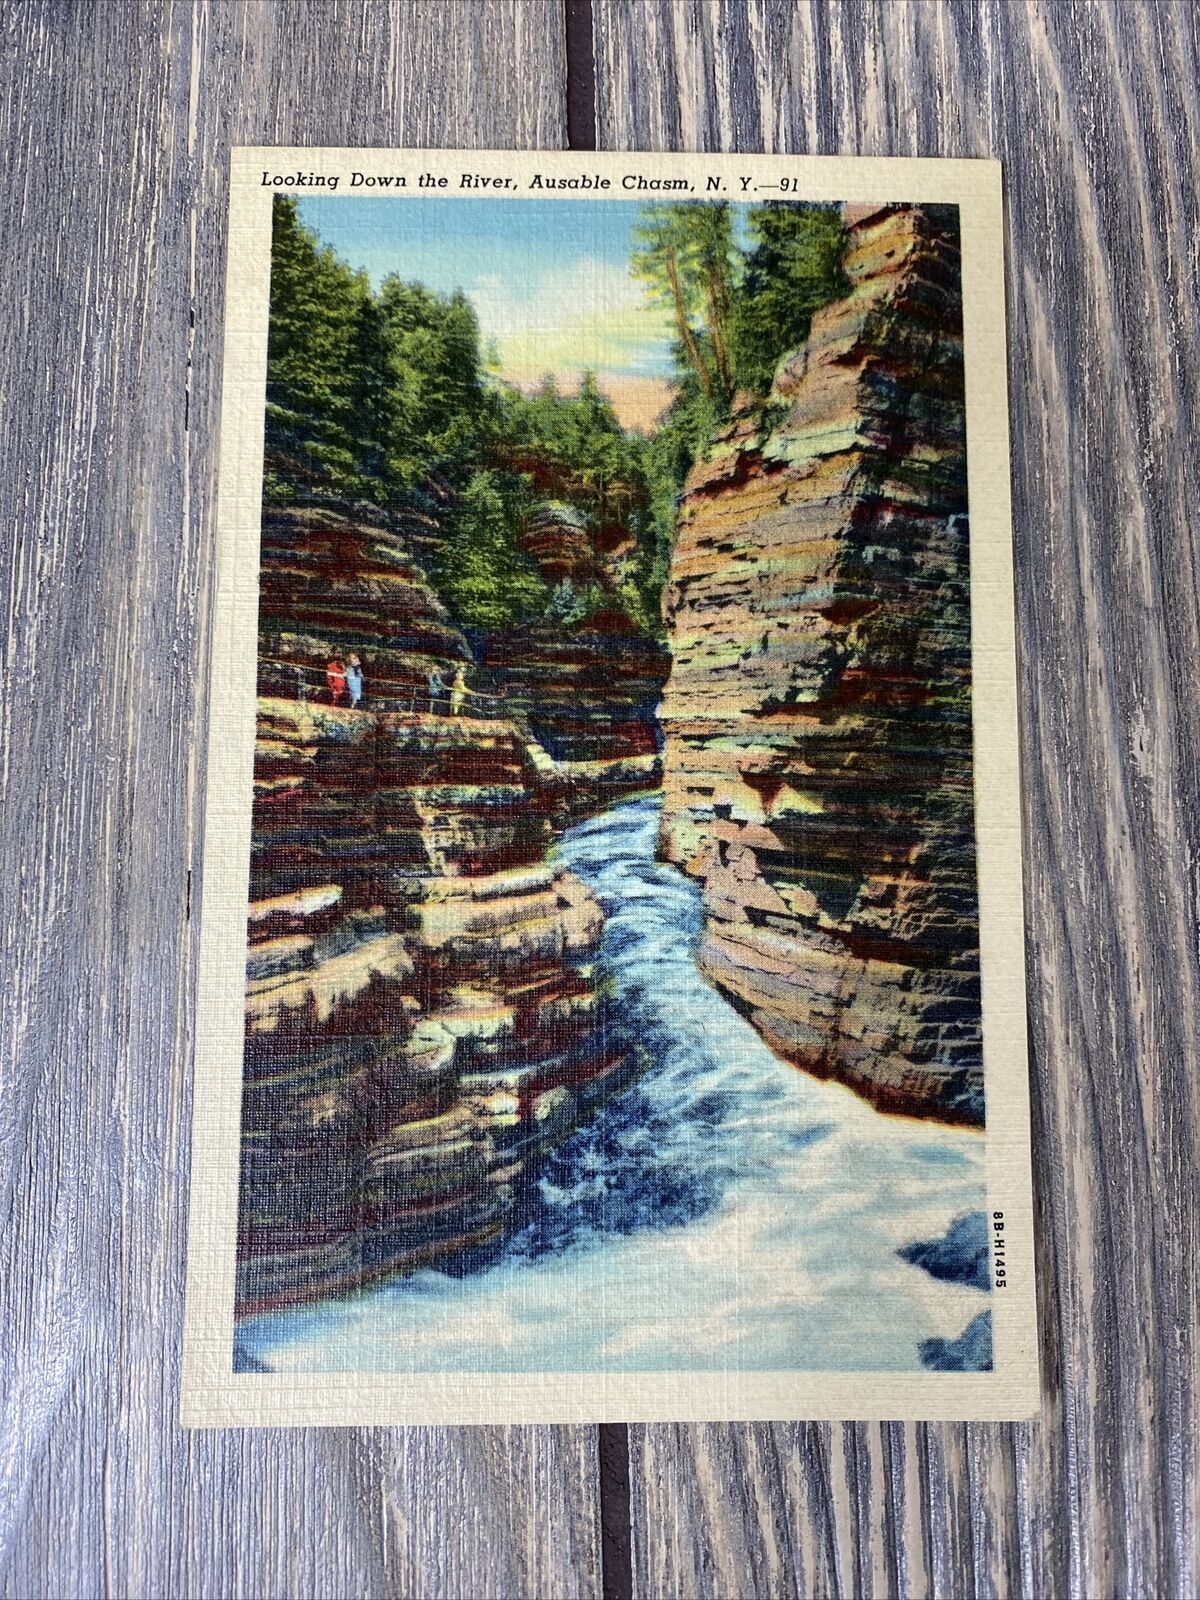 Vintage Looking Down The River Ausable Chasm NY Post Card 8B-H1495